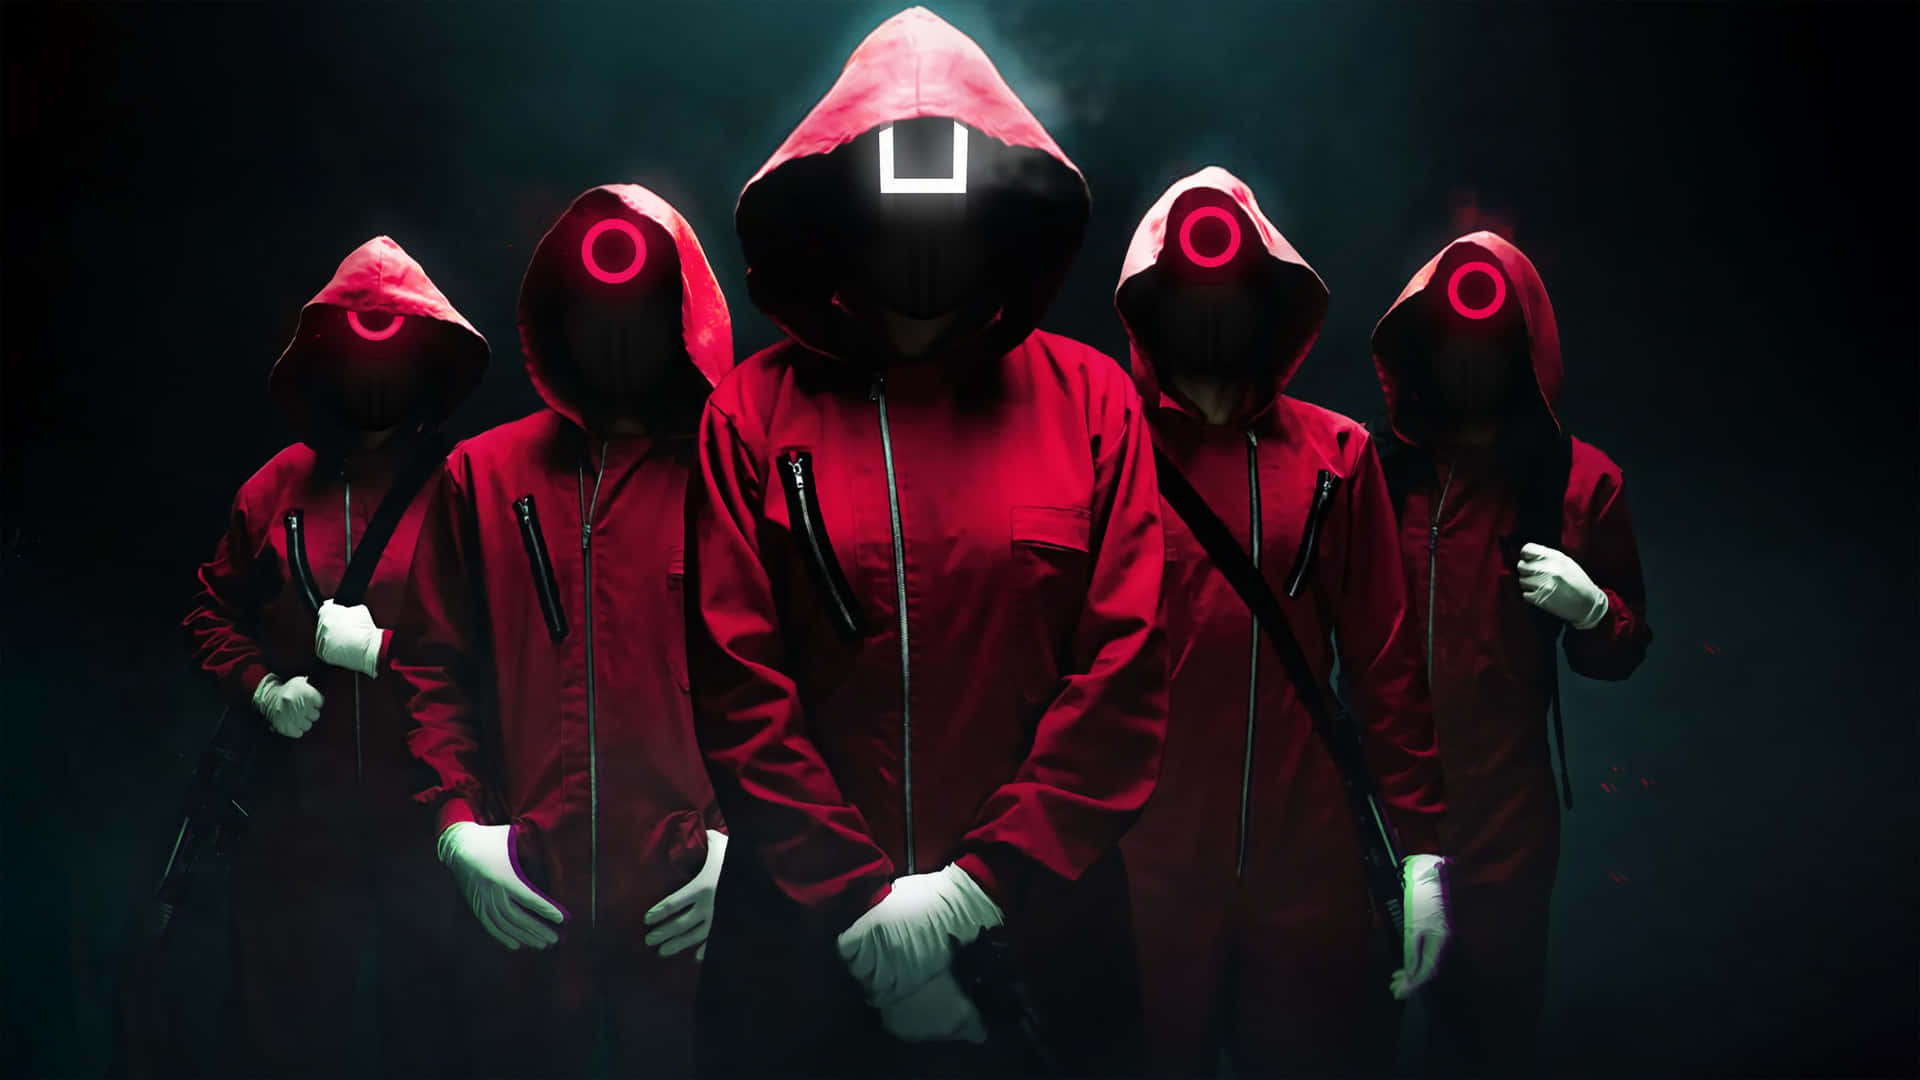 A Group Of People In Red Hoodies Standing In Front Of A Dark Background